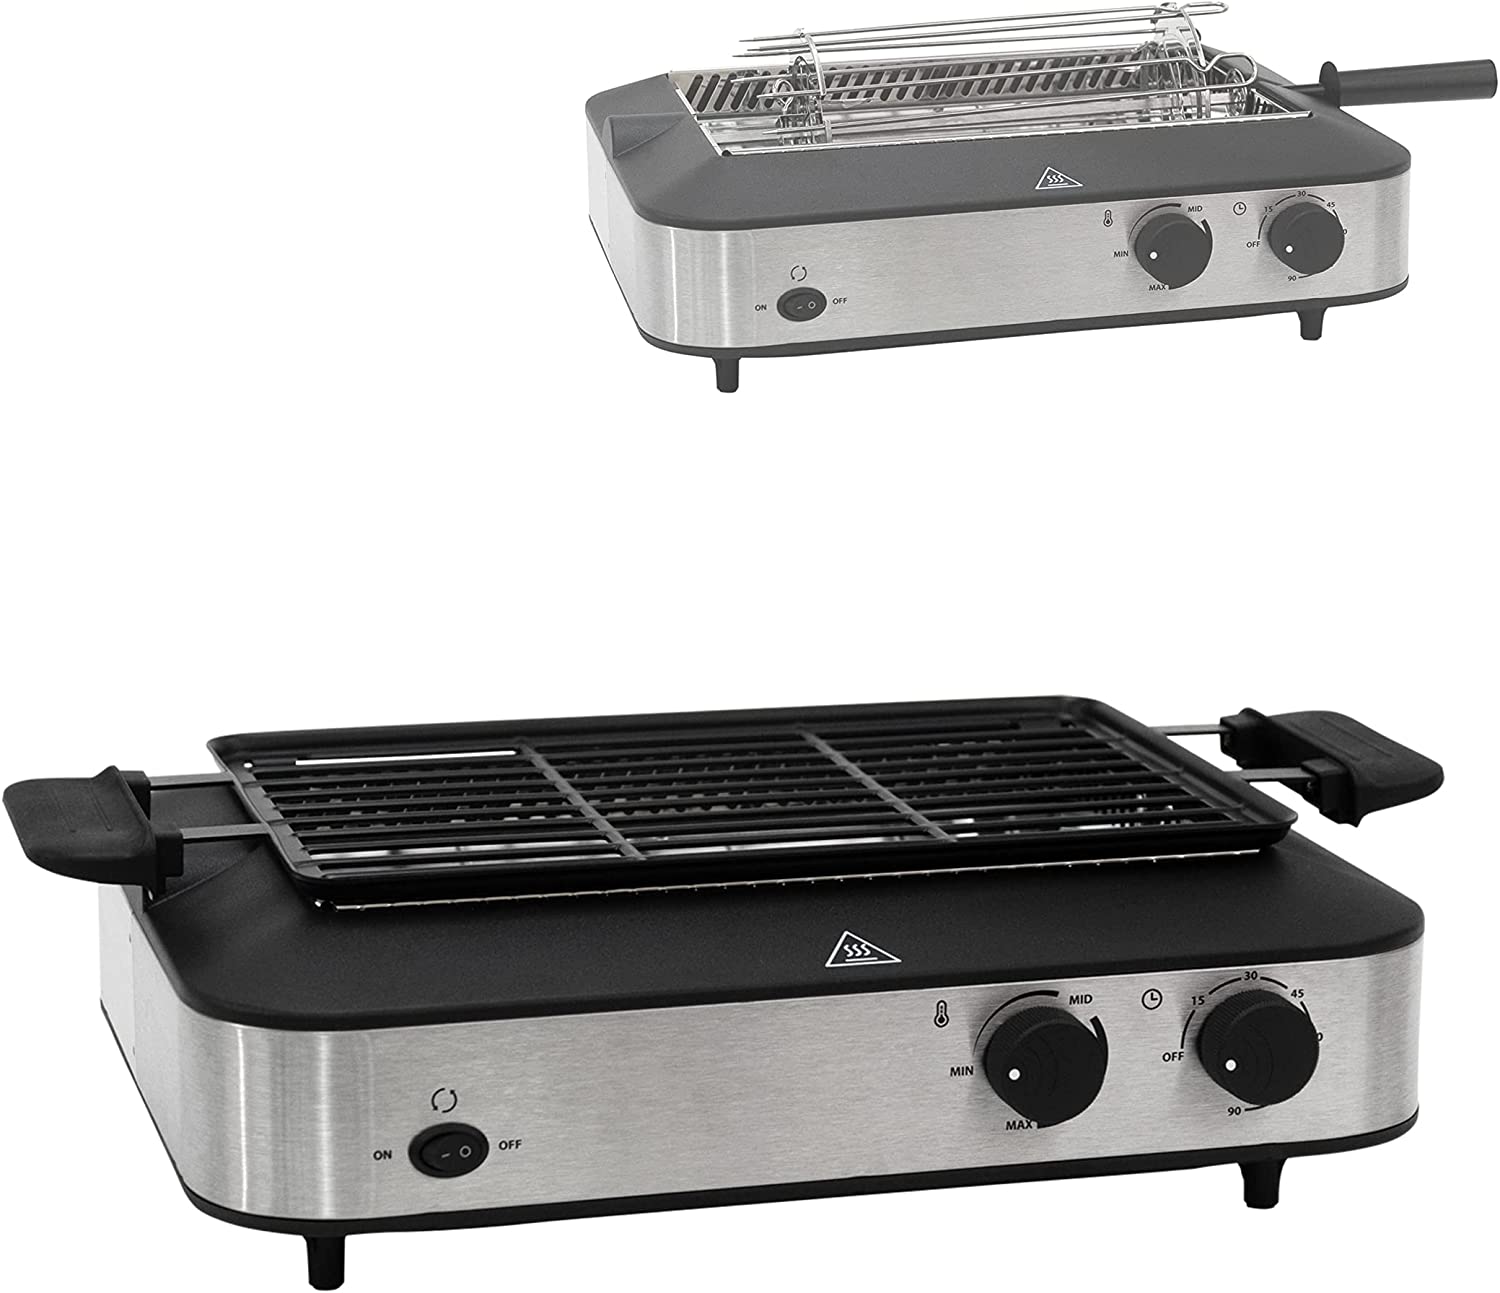 Ultratec 3-in-1 Table Grill with Rotisserie and Grill for Chicken, Kebab, Infrared Technology for Extra Low Smoke and Even Grilling Indoor and Outdoor Includes Accessories, Silver-Black